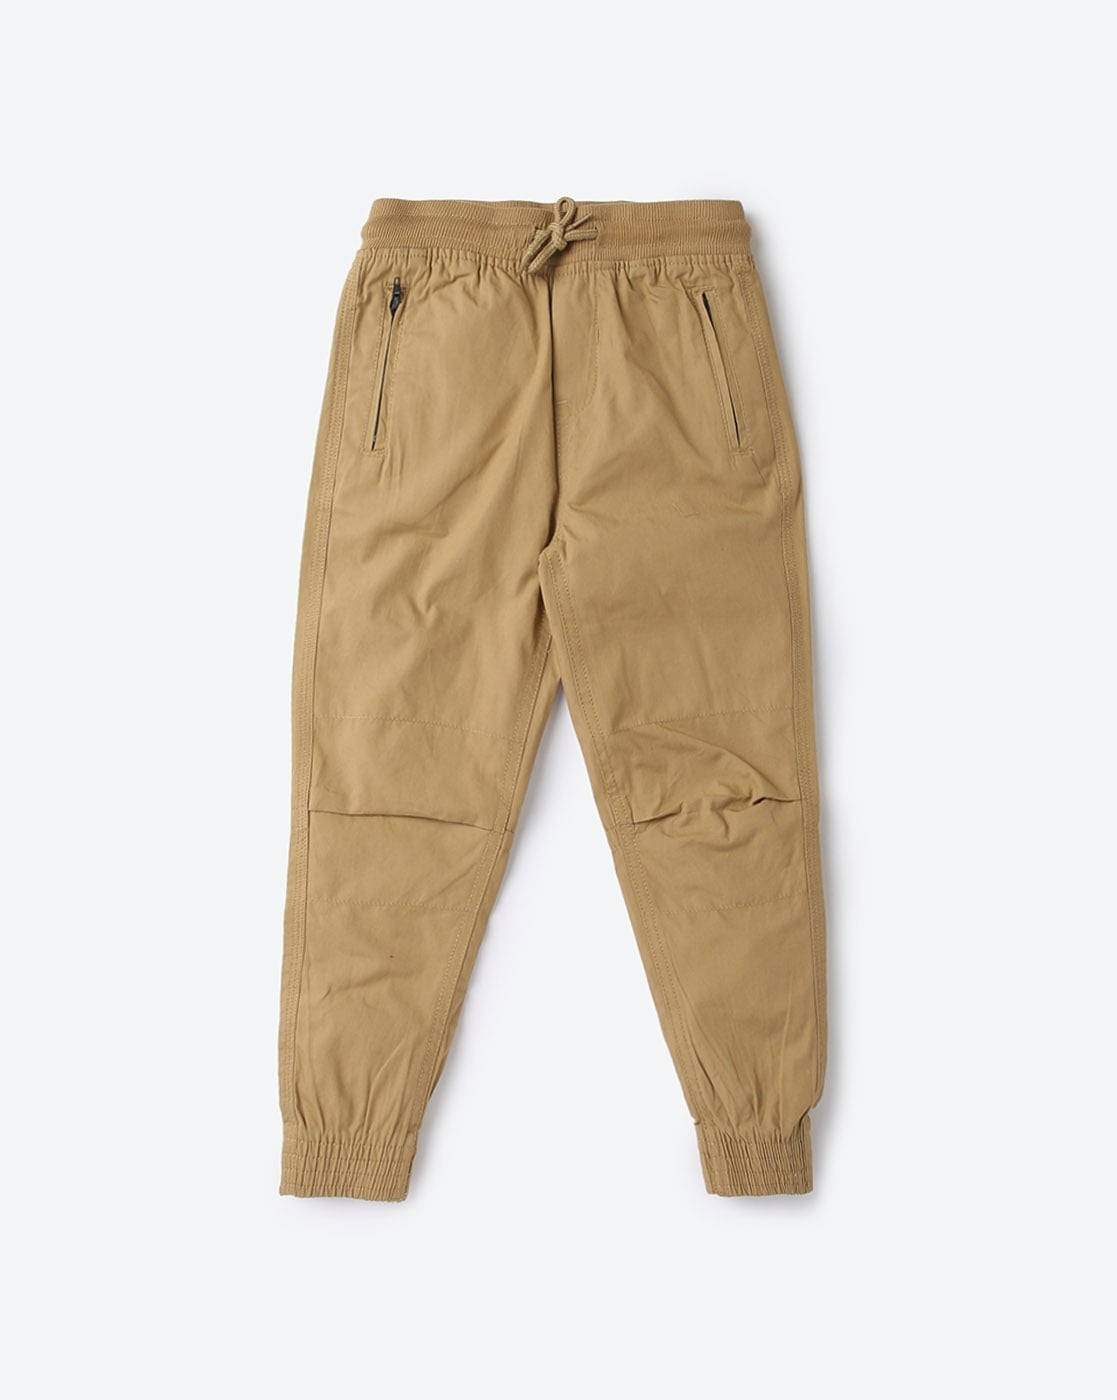 joggers for boys joggers for boys Suppliers and Manufacturers at  Alibabacom